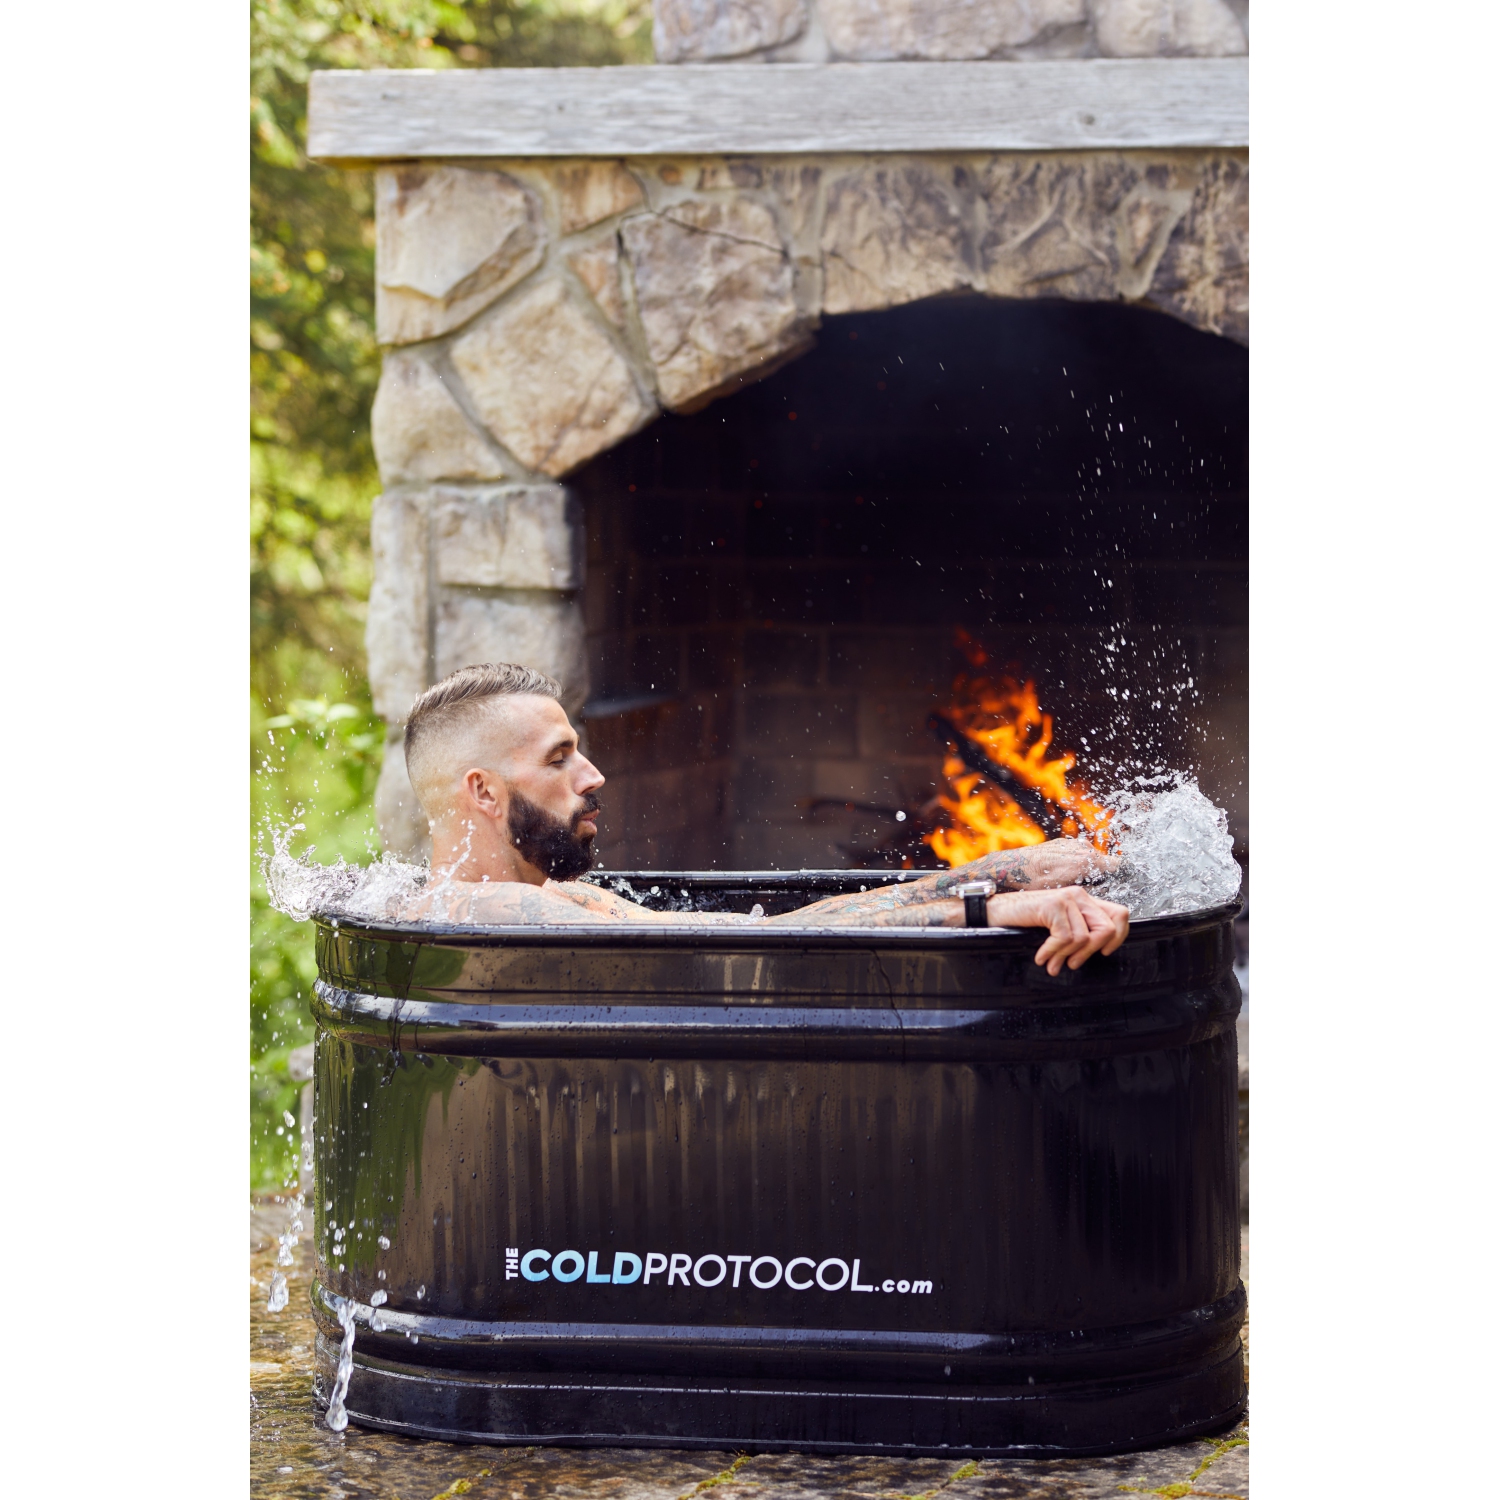 Cold Plunge 85-Gallon Tub with Cover $94.96 After Coupon (Reg